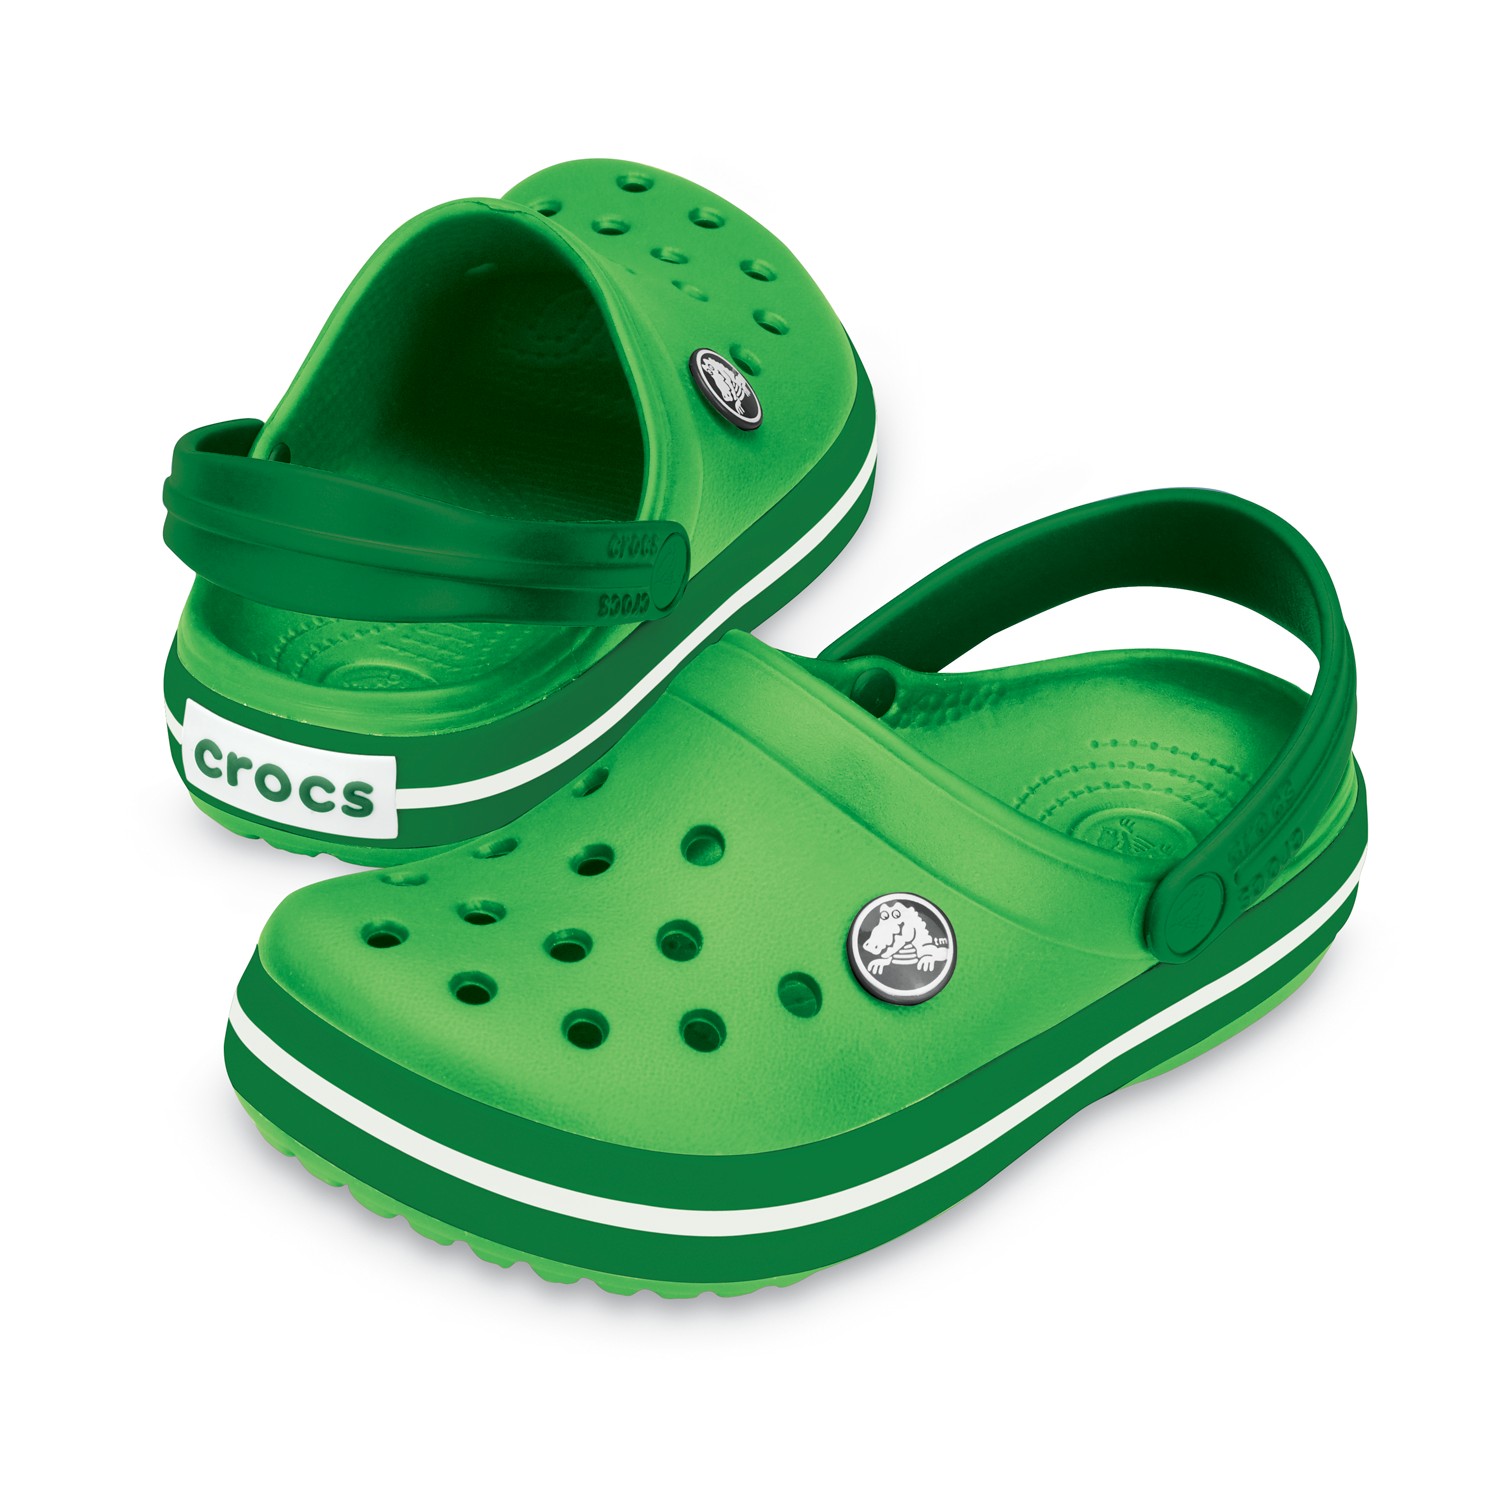 Crocs Crocband Kids Lime Green - Slippers - Everyday shoes - Shoes ...